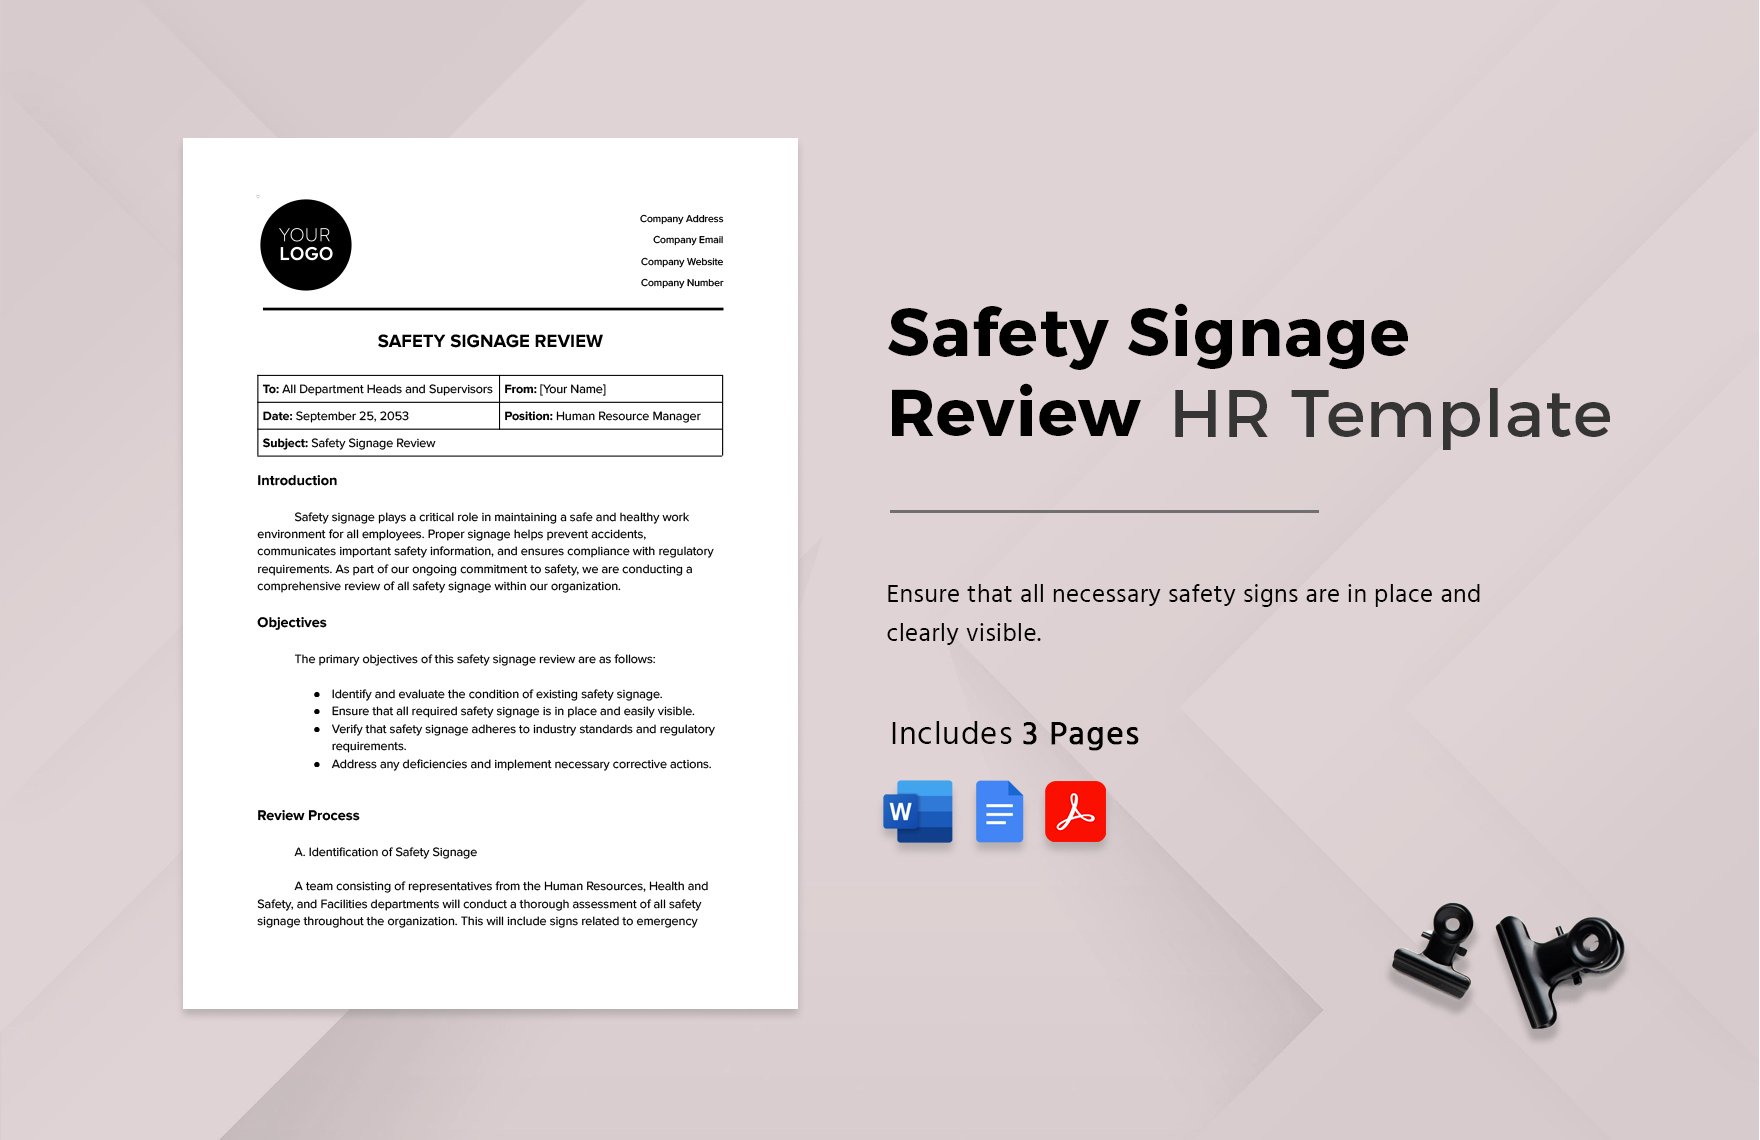 Safety Signage Review HR Template